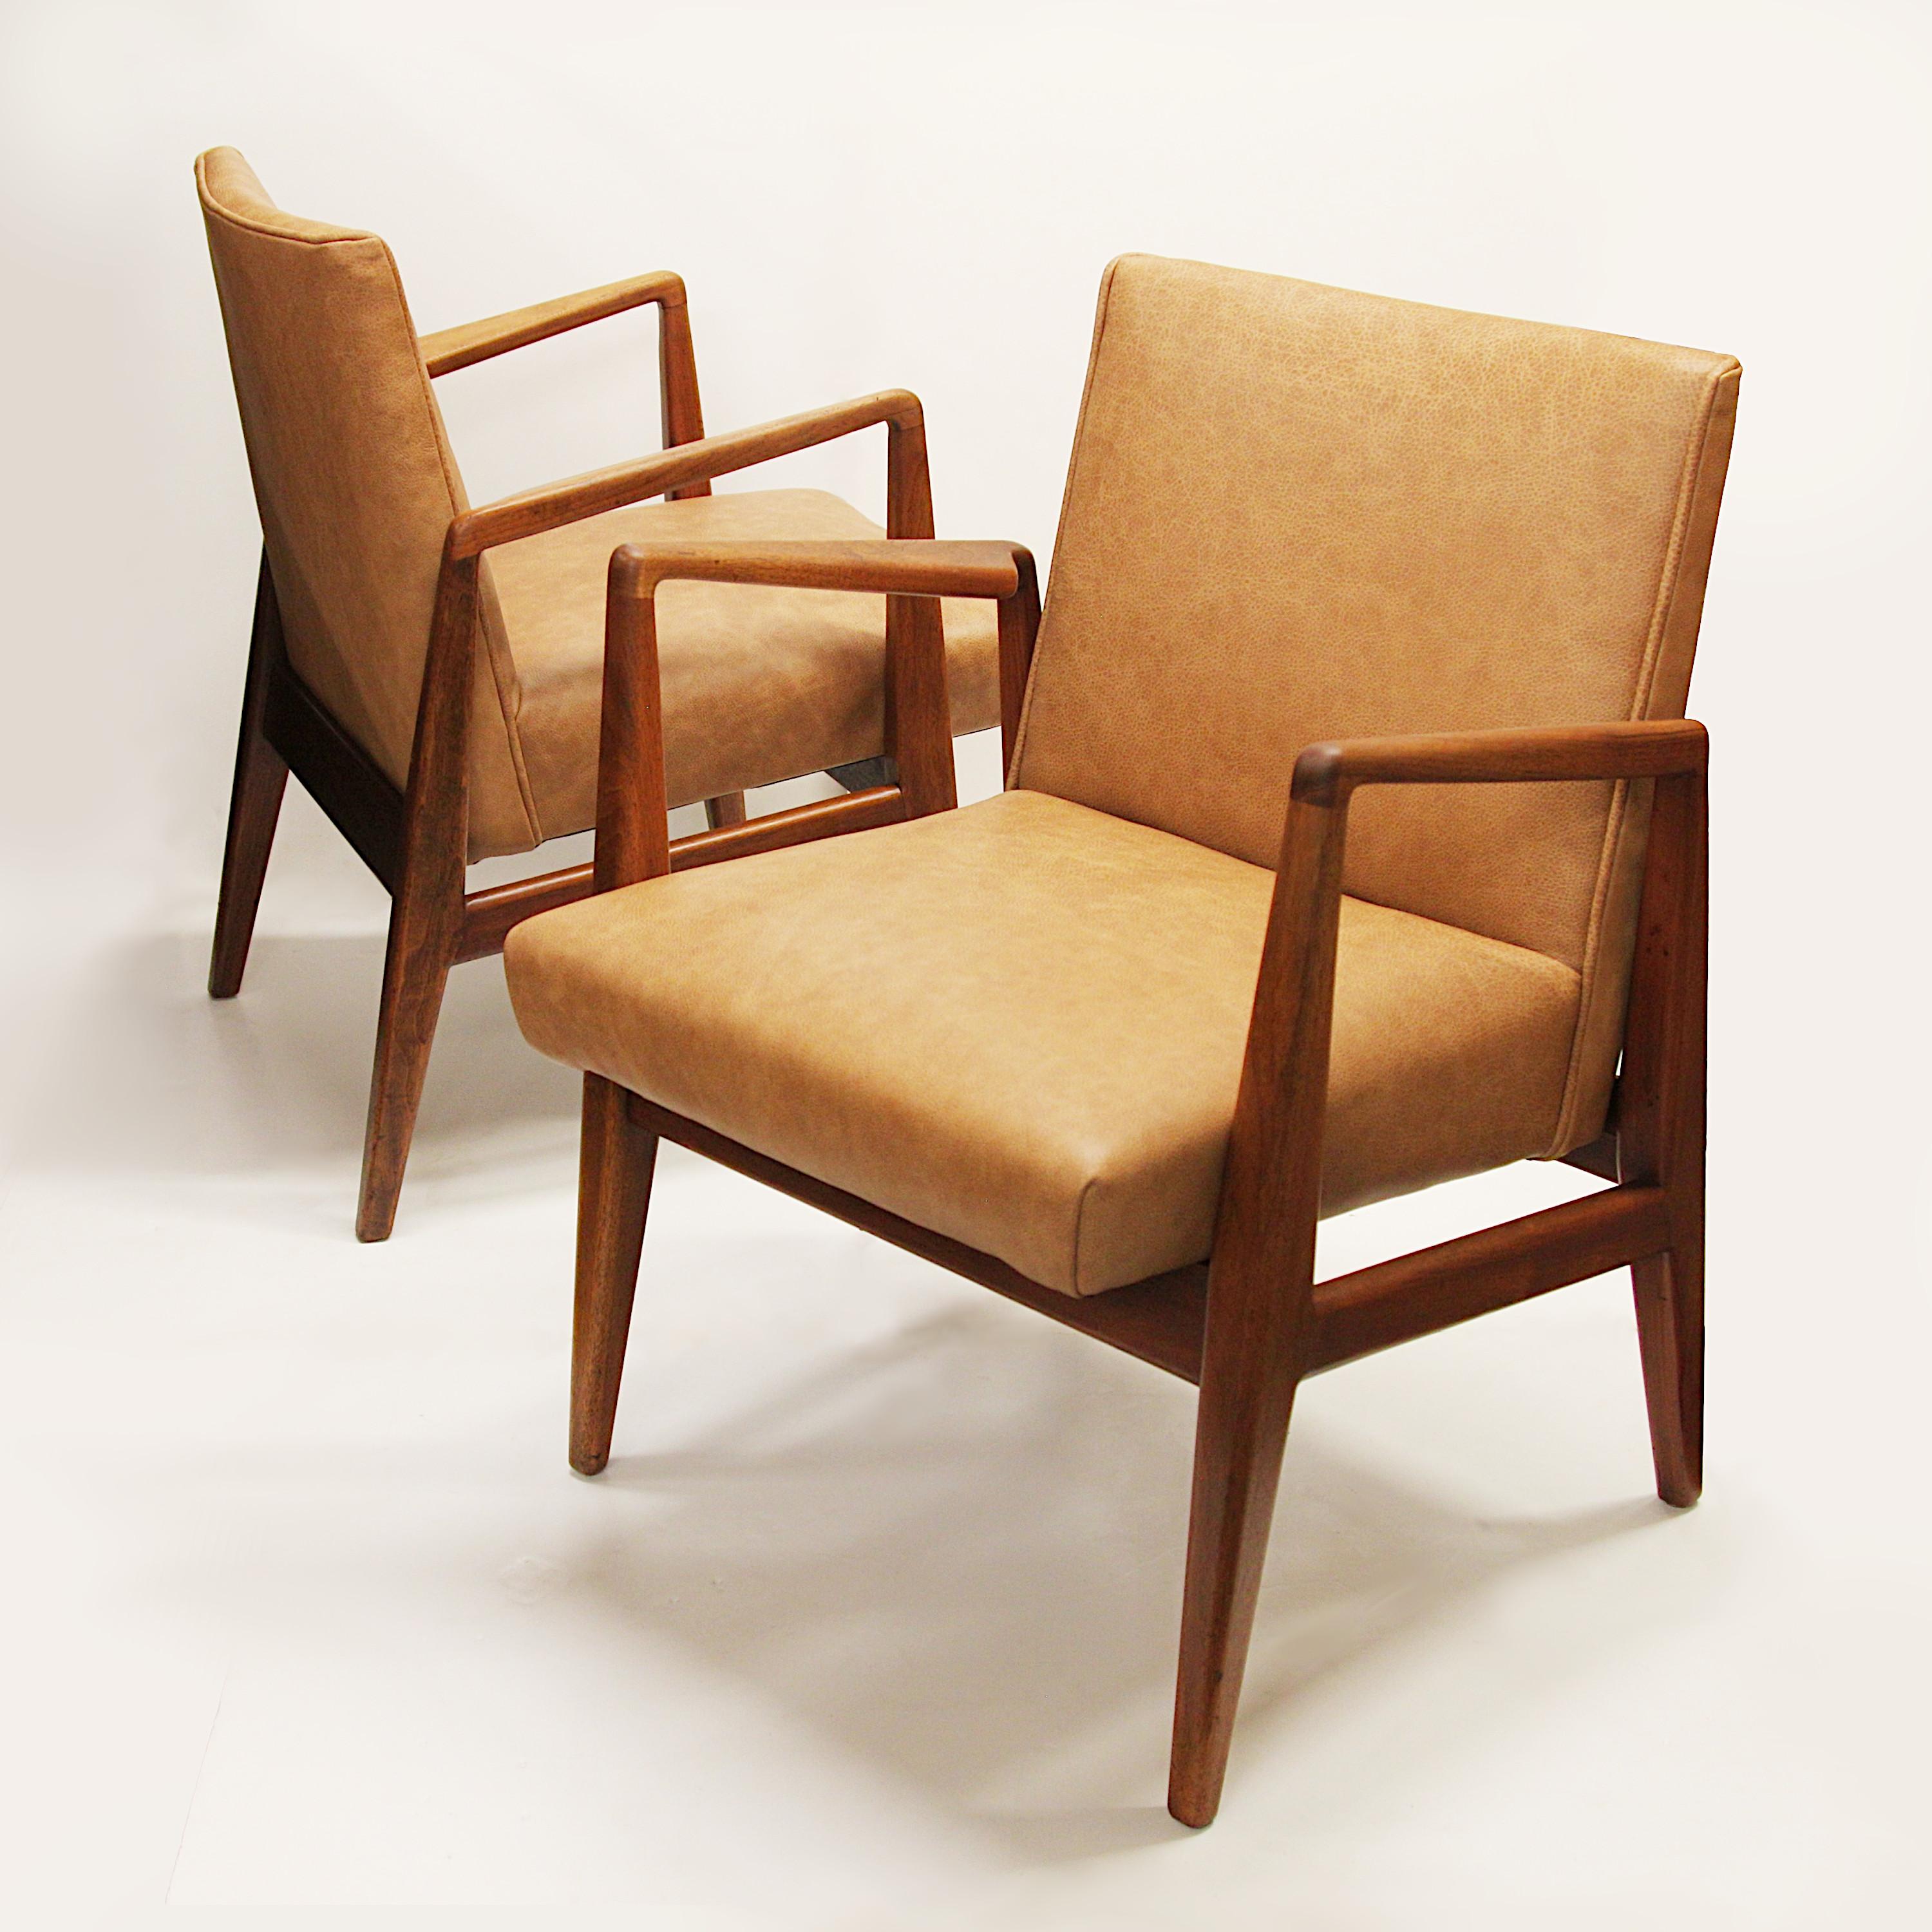 Fantastic pair of Model C-120 armchairs chairs designed by Jens Risom and manufactured by Jens Risom Design Inc. Chairs feature beautifully sculpted walnut frames and are newly upholstered in a bold gold/light brown leather. These are great examples